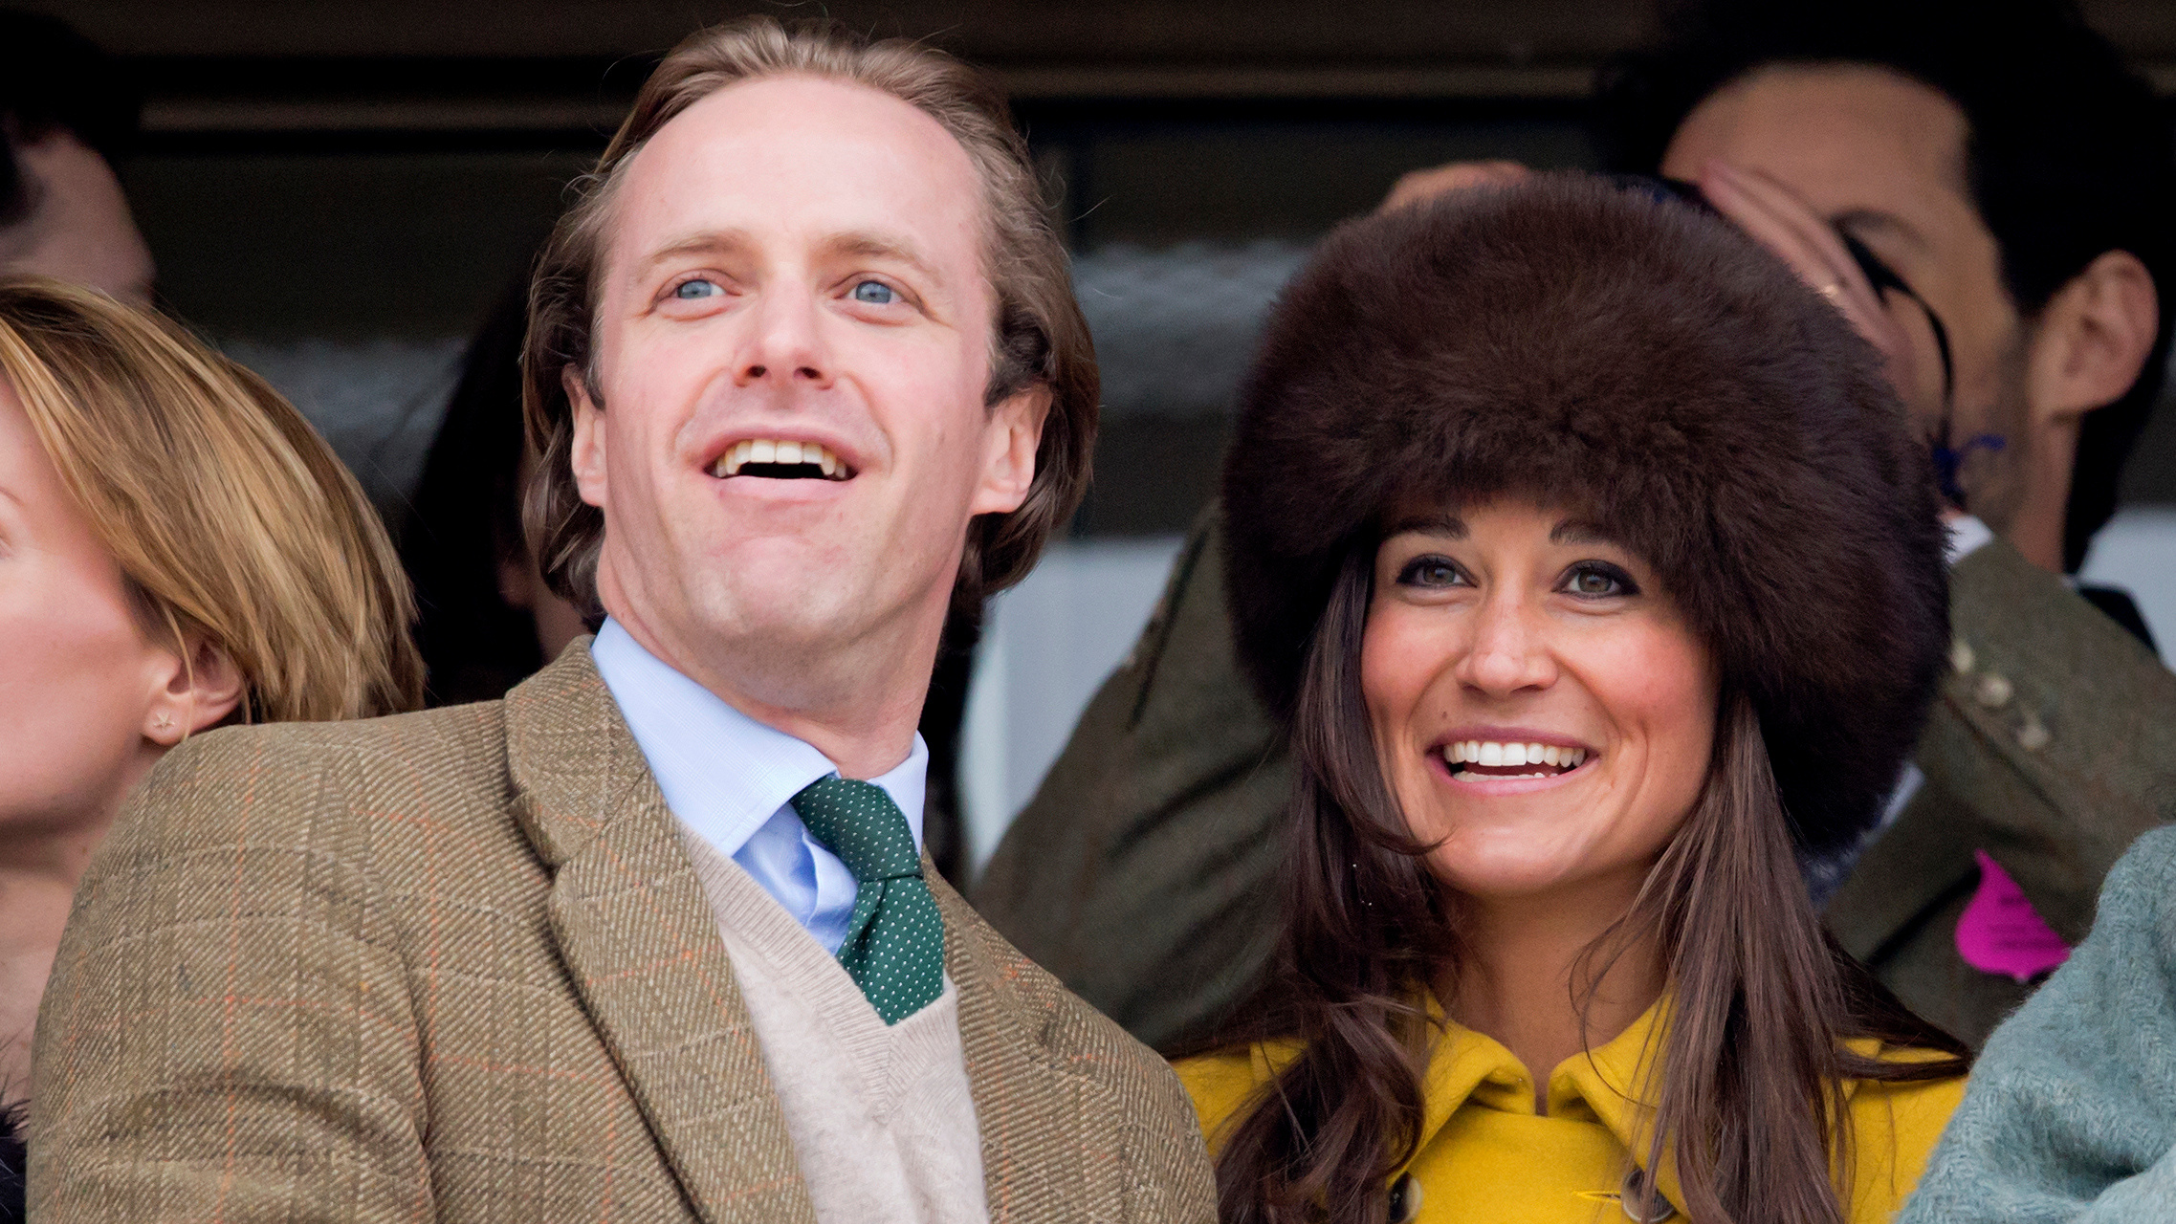 Pippa Middleton's Ex Thomas Kingston's Autopsy Results Reveal He Died by Suicide